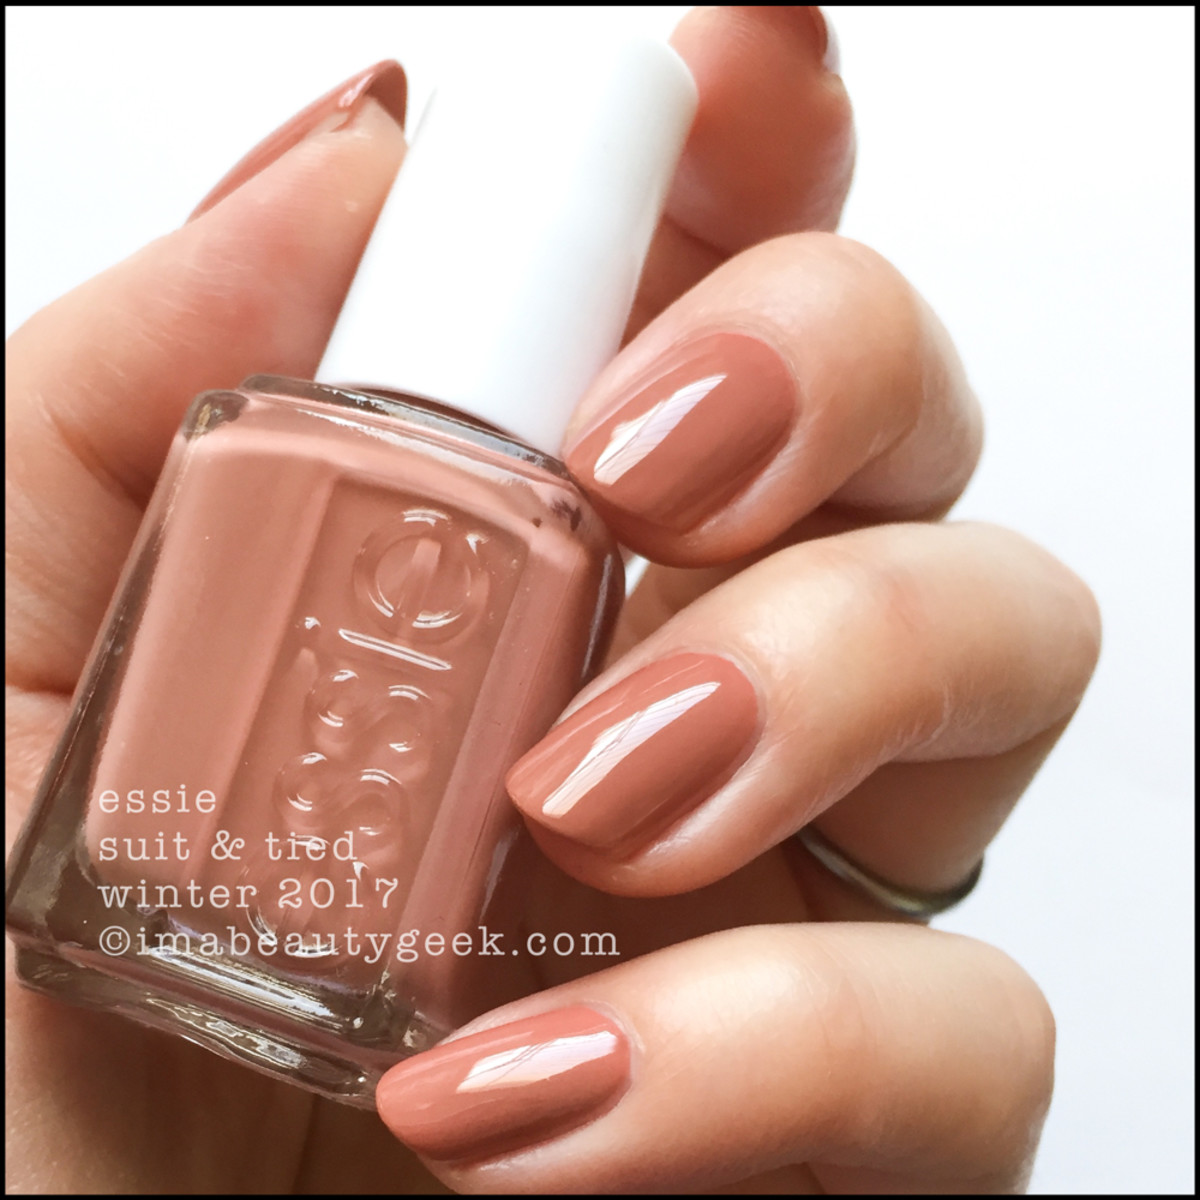 Essie Suit and Tied _ Essie Winter 2017 Collection Swatches Review